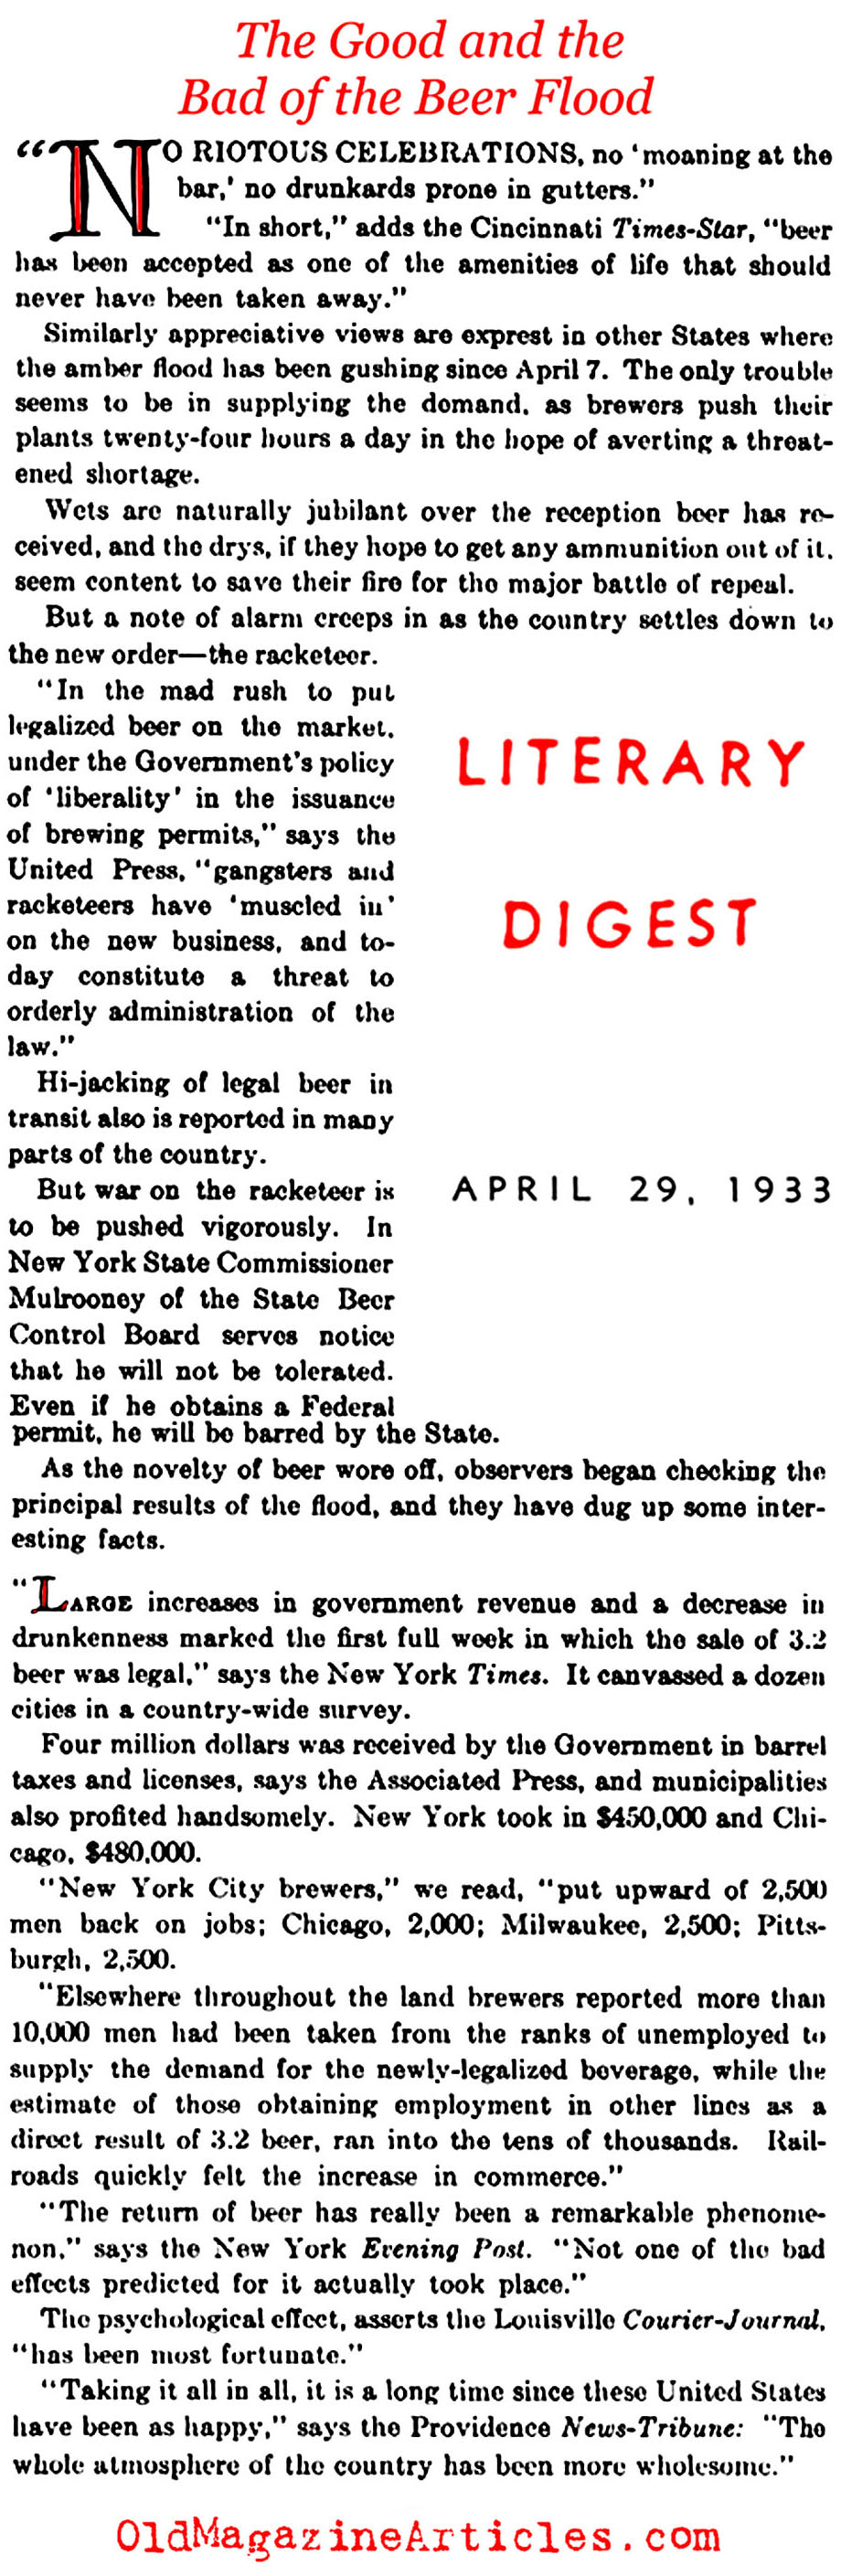 Beer Flowed the Week Prohibition Ended (Literary Digest, 1933)